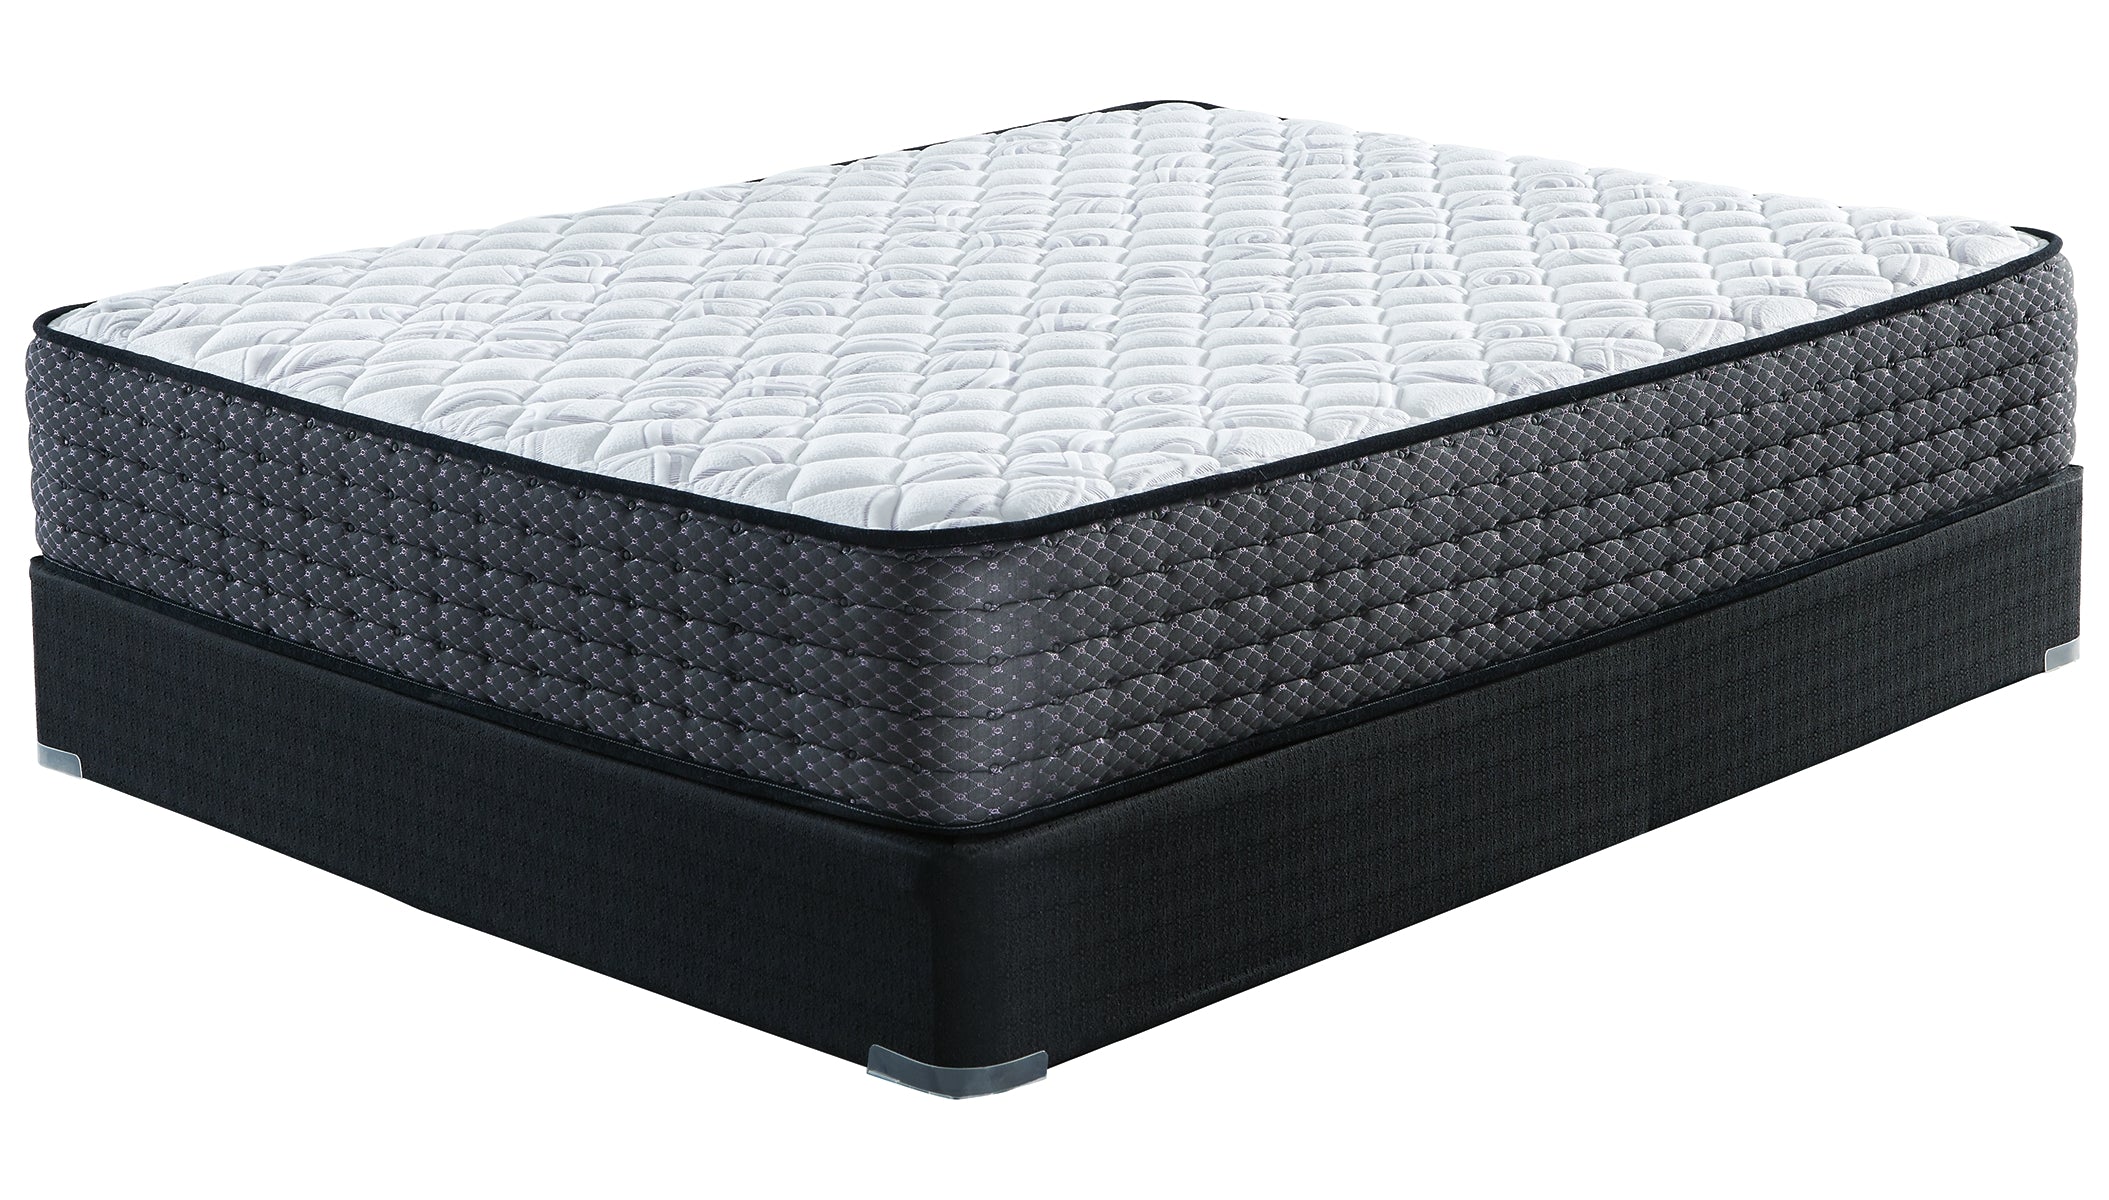 Limited Edition Firm King Mattress